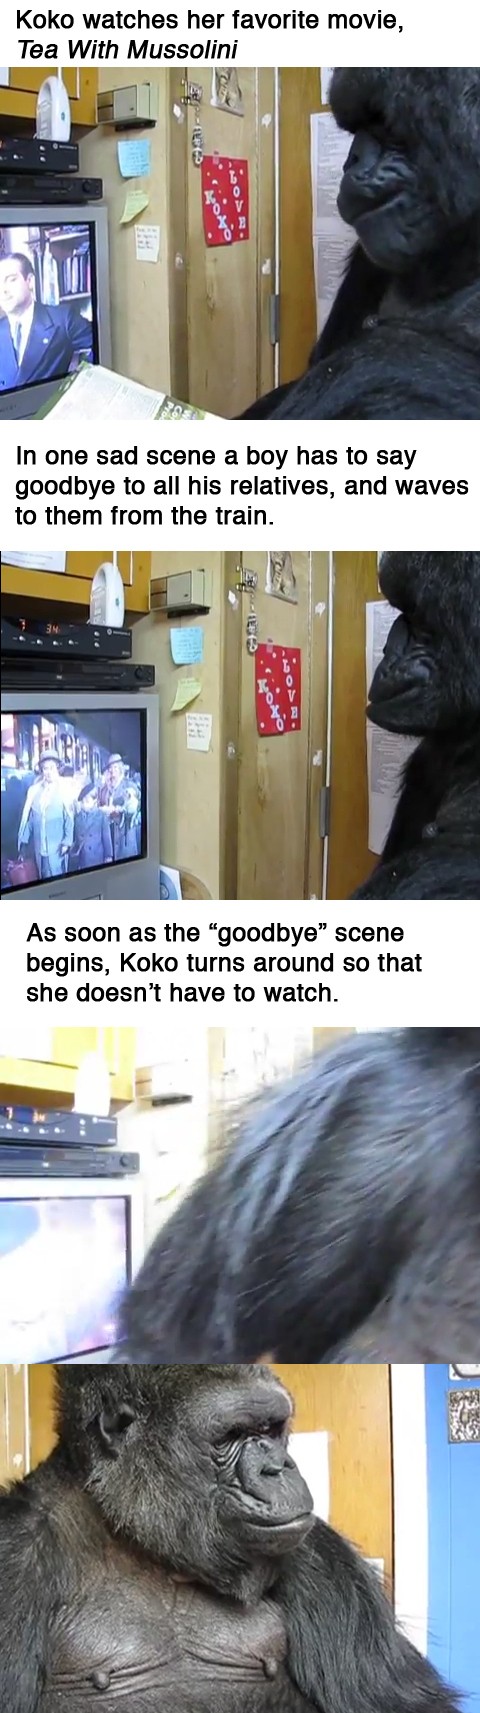 Koko's reaction to a sad moment in a movie